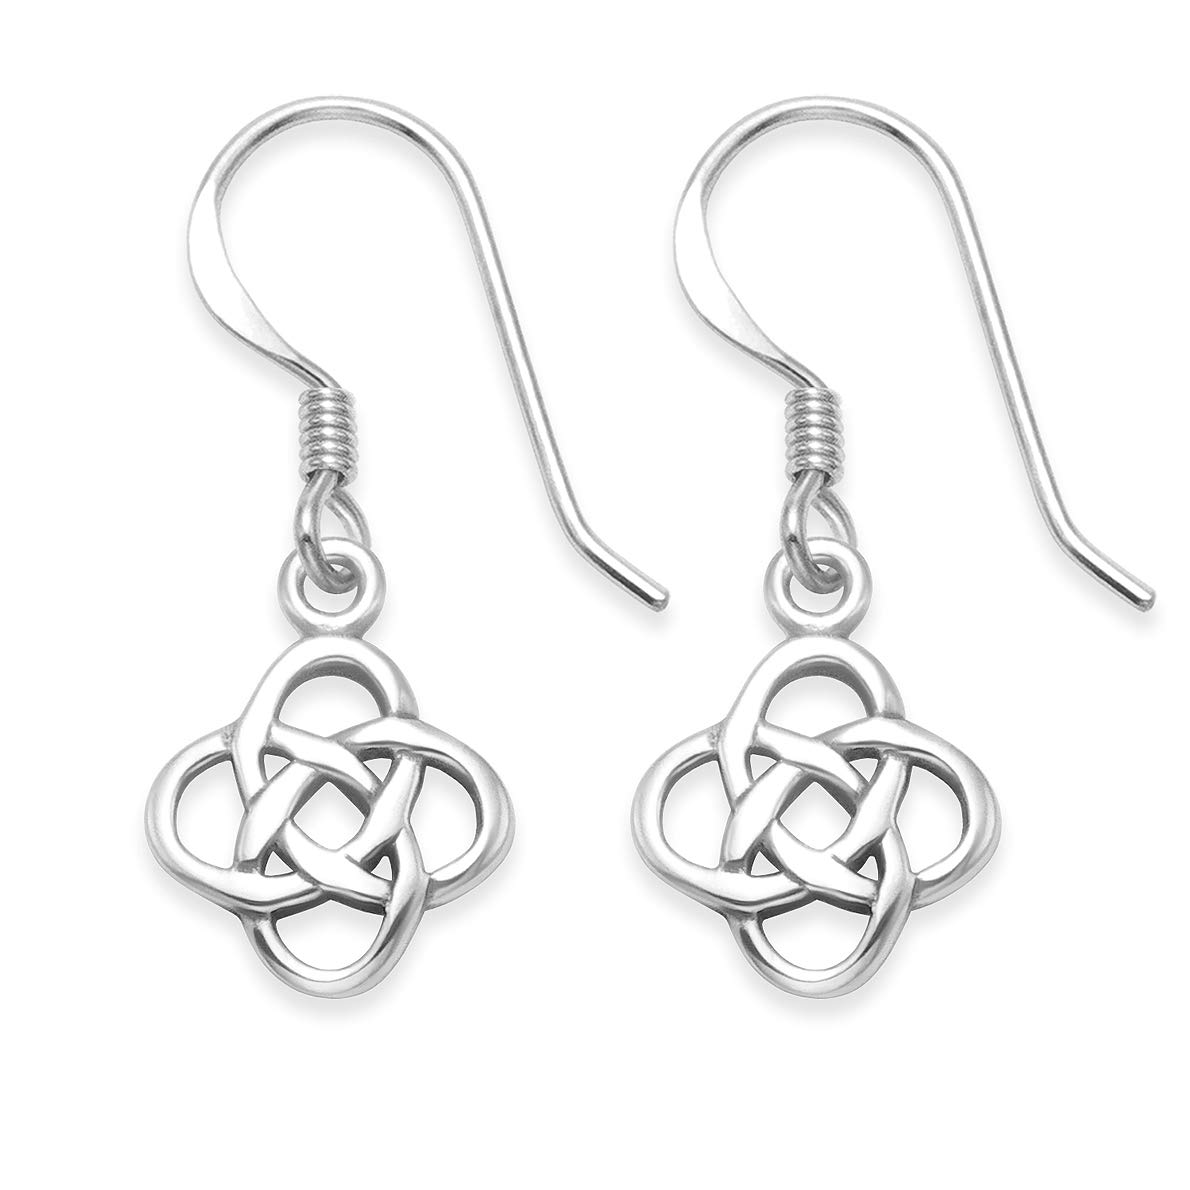 Heather Needham Sterling Silver Celtic Earrings - SIZE: SMALL 9mm. Gift boxed Silver Celtic Drop Earrings. 6420.